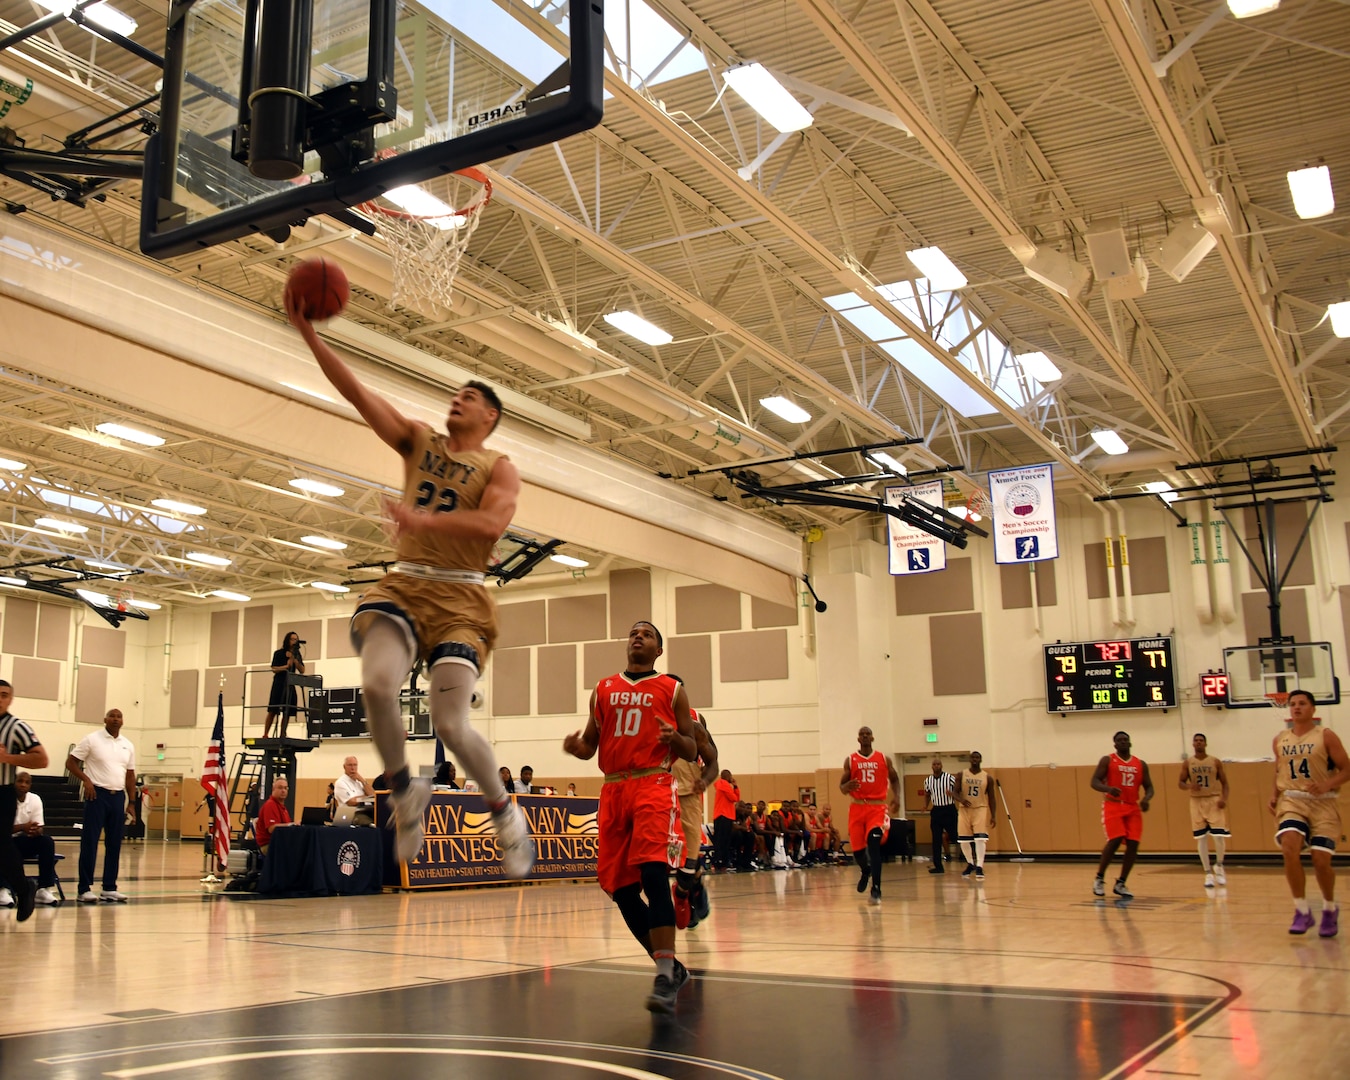 Elite U.S. military basketball players from around the world compete for dominance at Naval Station Mayport during the 2019 Armed Forces Men's and Women's Basketball Championship. Army, Marine Corps, Navy (with Coast Guard) and Air Force teams square off at the annual event which features double round-robin action, followed by championship and consolation games to crown the best players in the military. (U.S. Navy photo by Mass Communication Specialist 1st Class Gulianna Dunn/RELEASED)